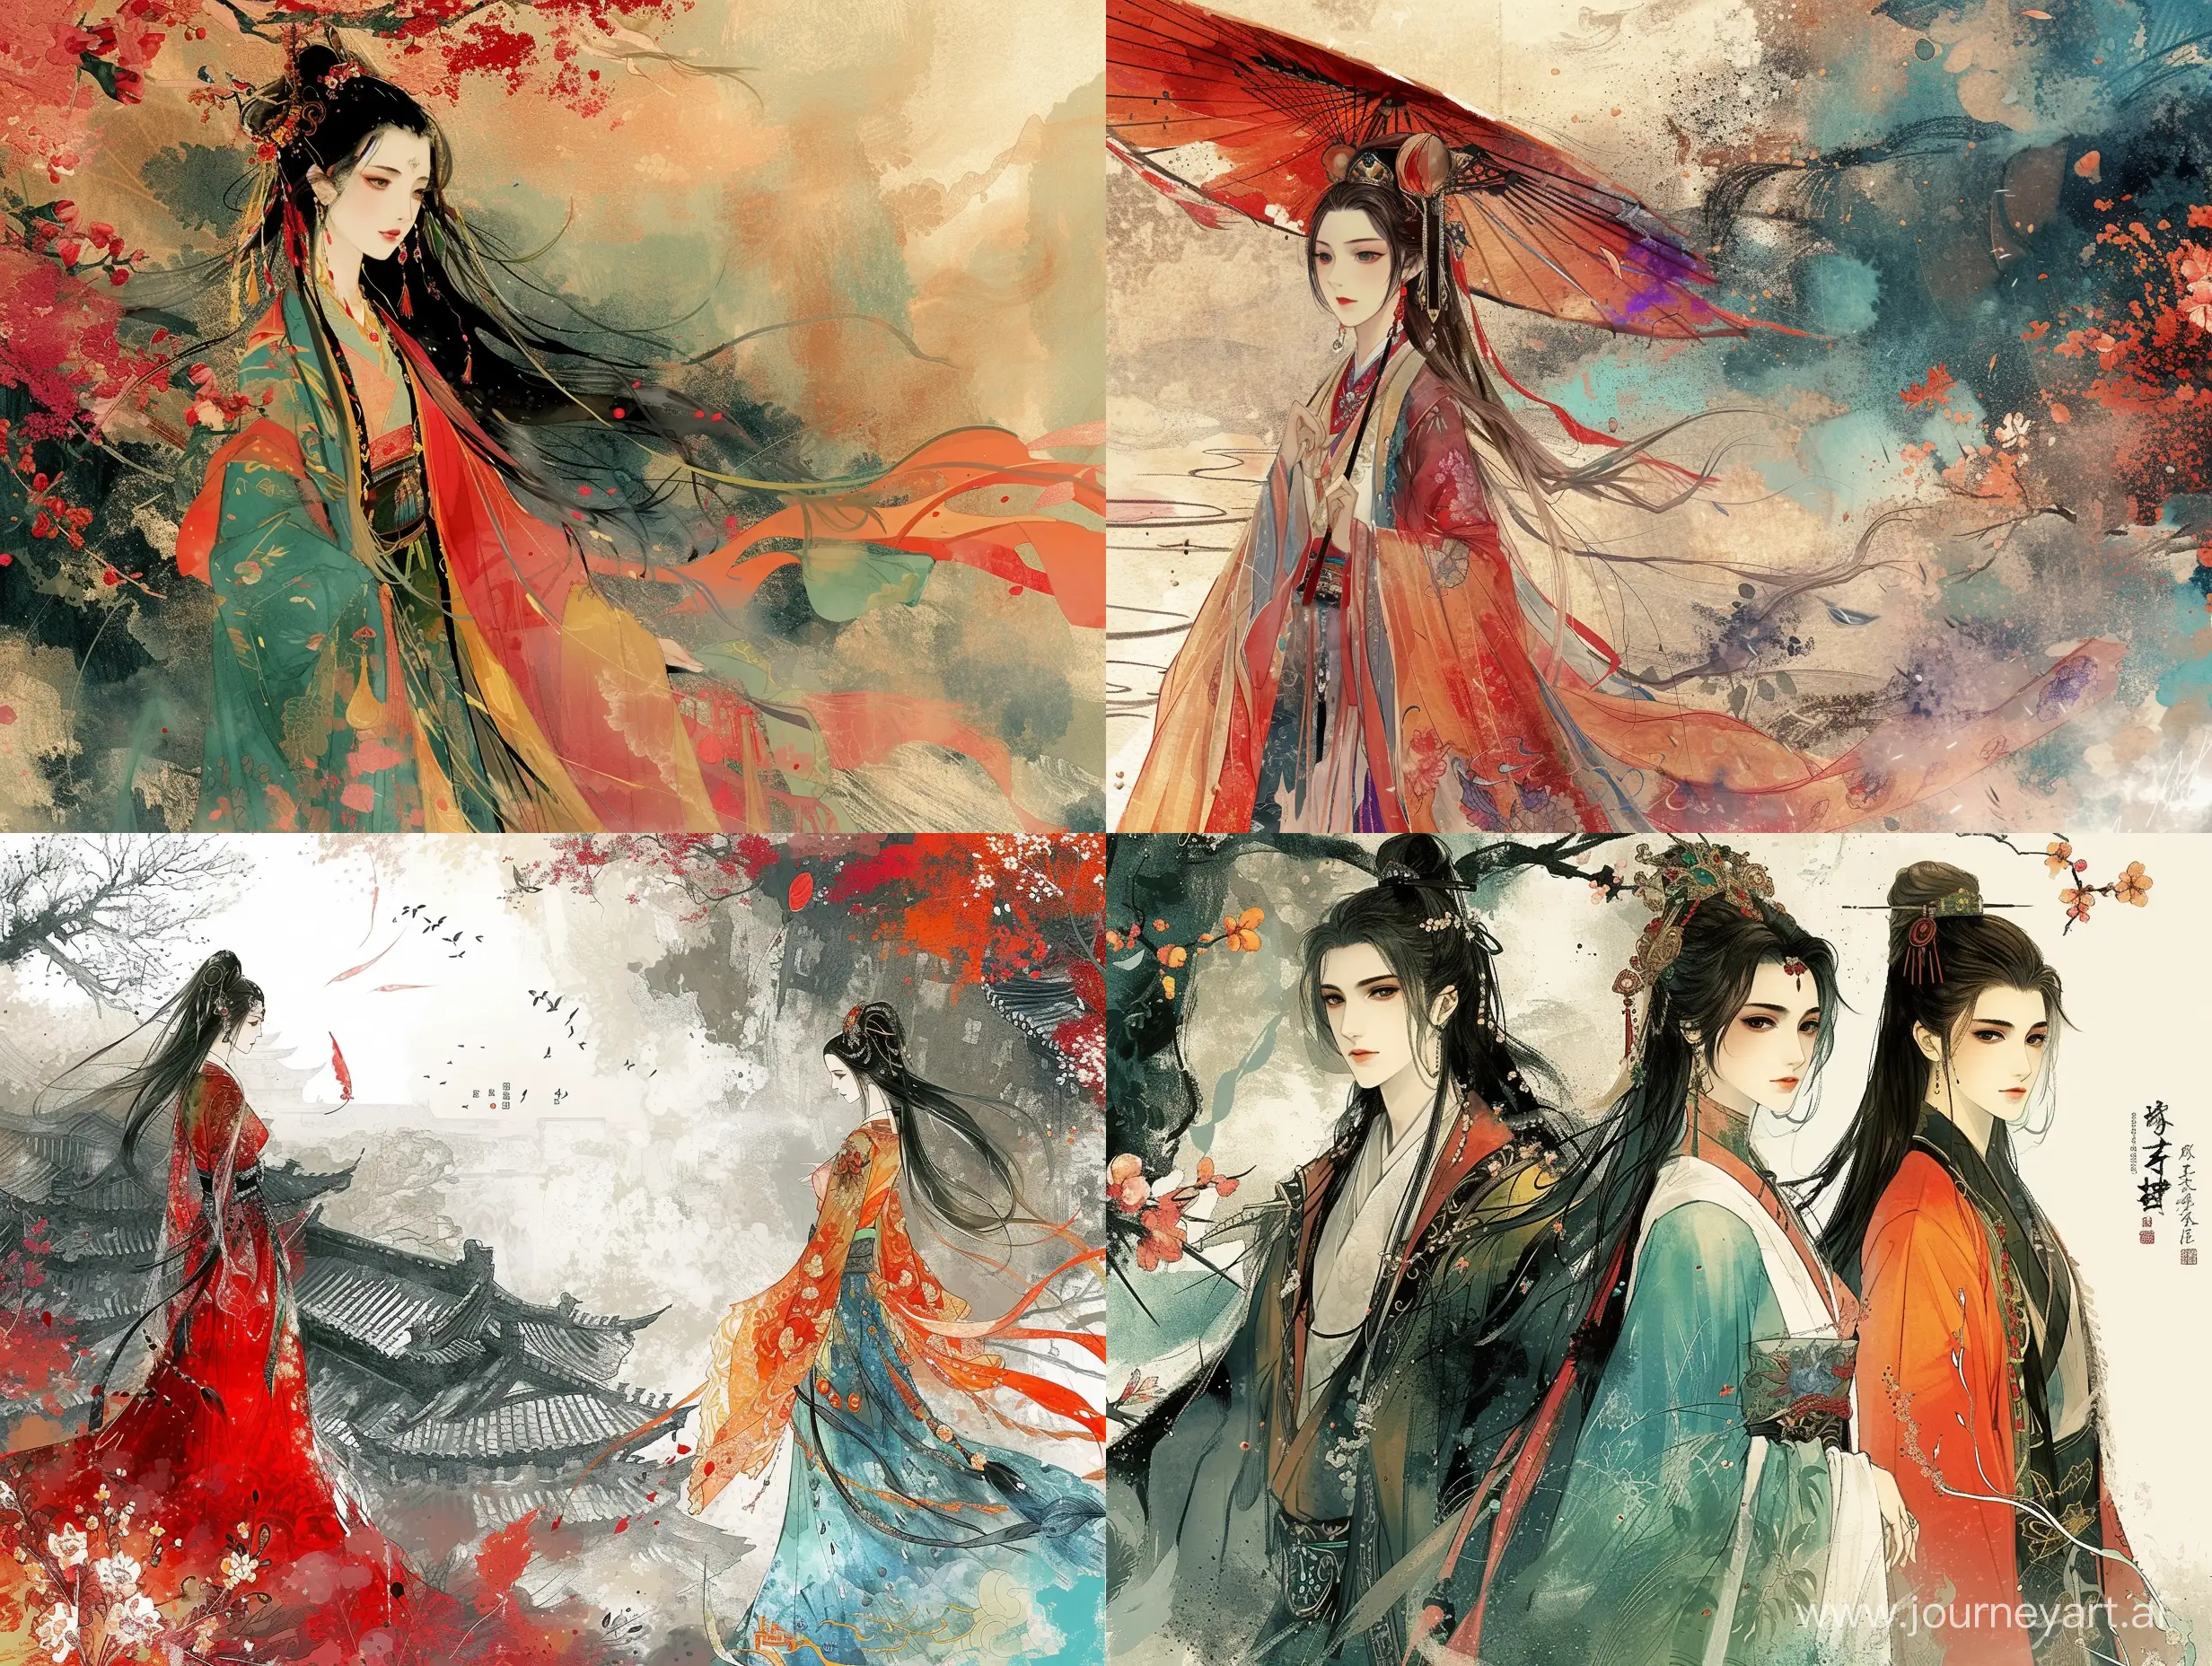 Vibrant-Chinese-Ink-Painting-Ancient-Eastern-Aesthetics-in-HighDefinition-Manga-Style